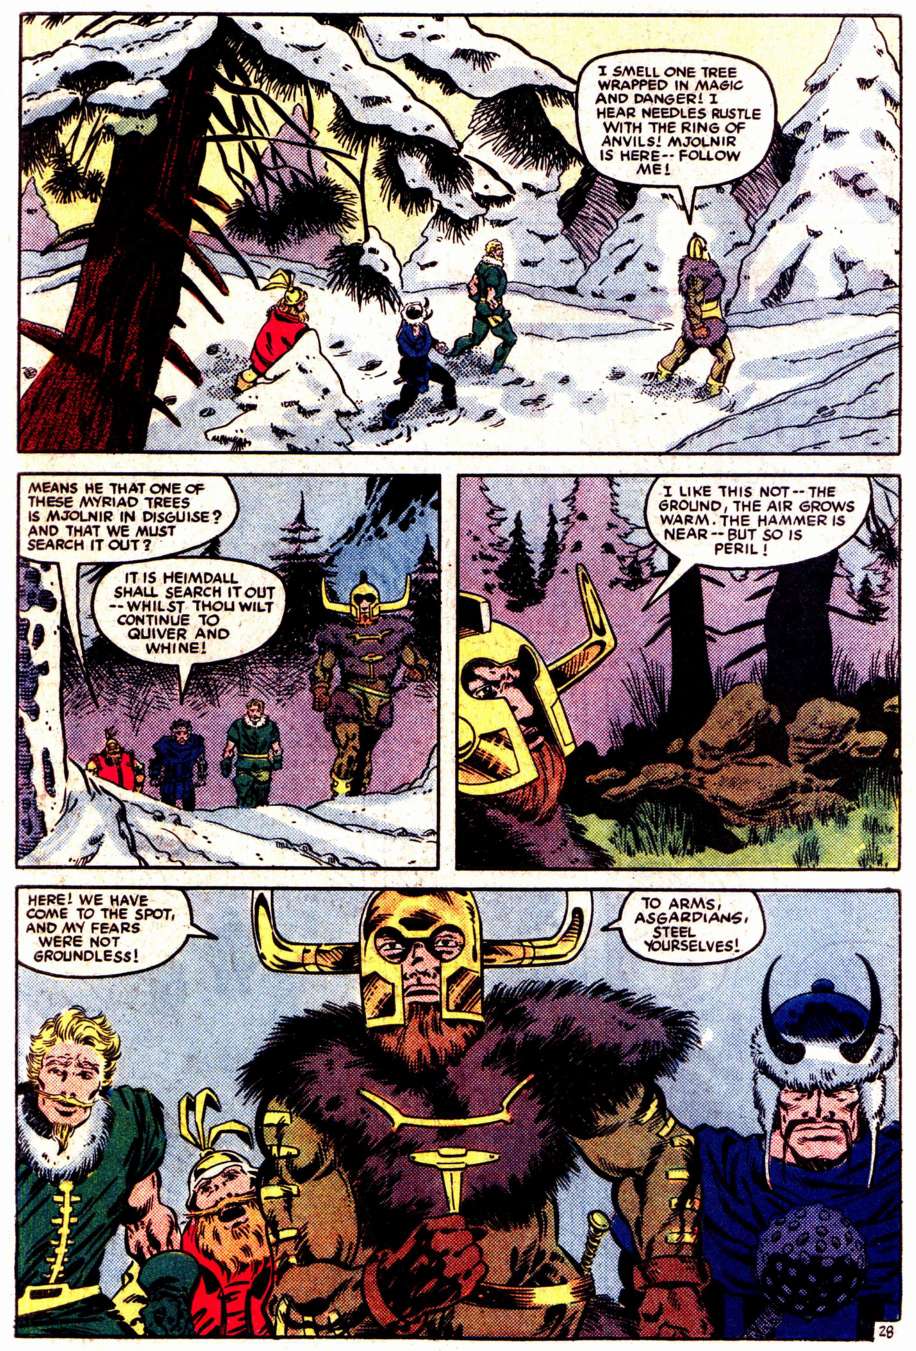 What If? (1977) issue 47 - Loki had found The hammer of Thor - Page 29